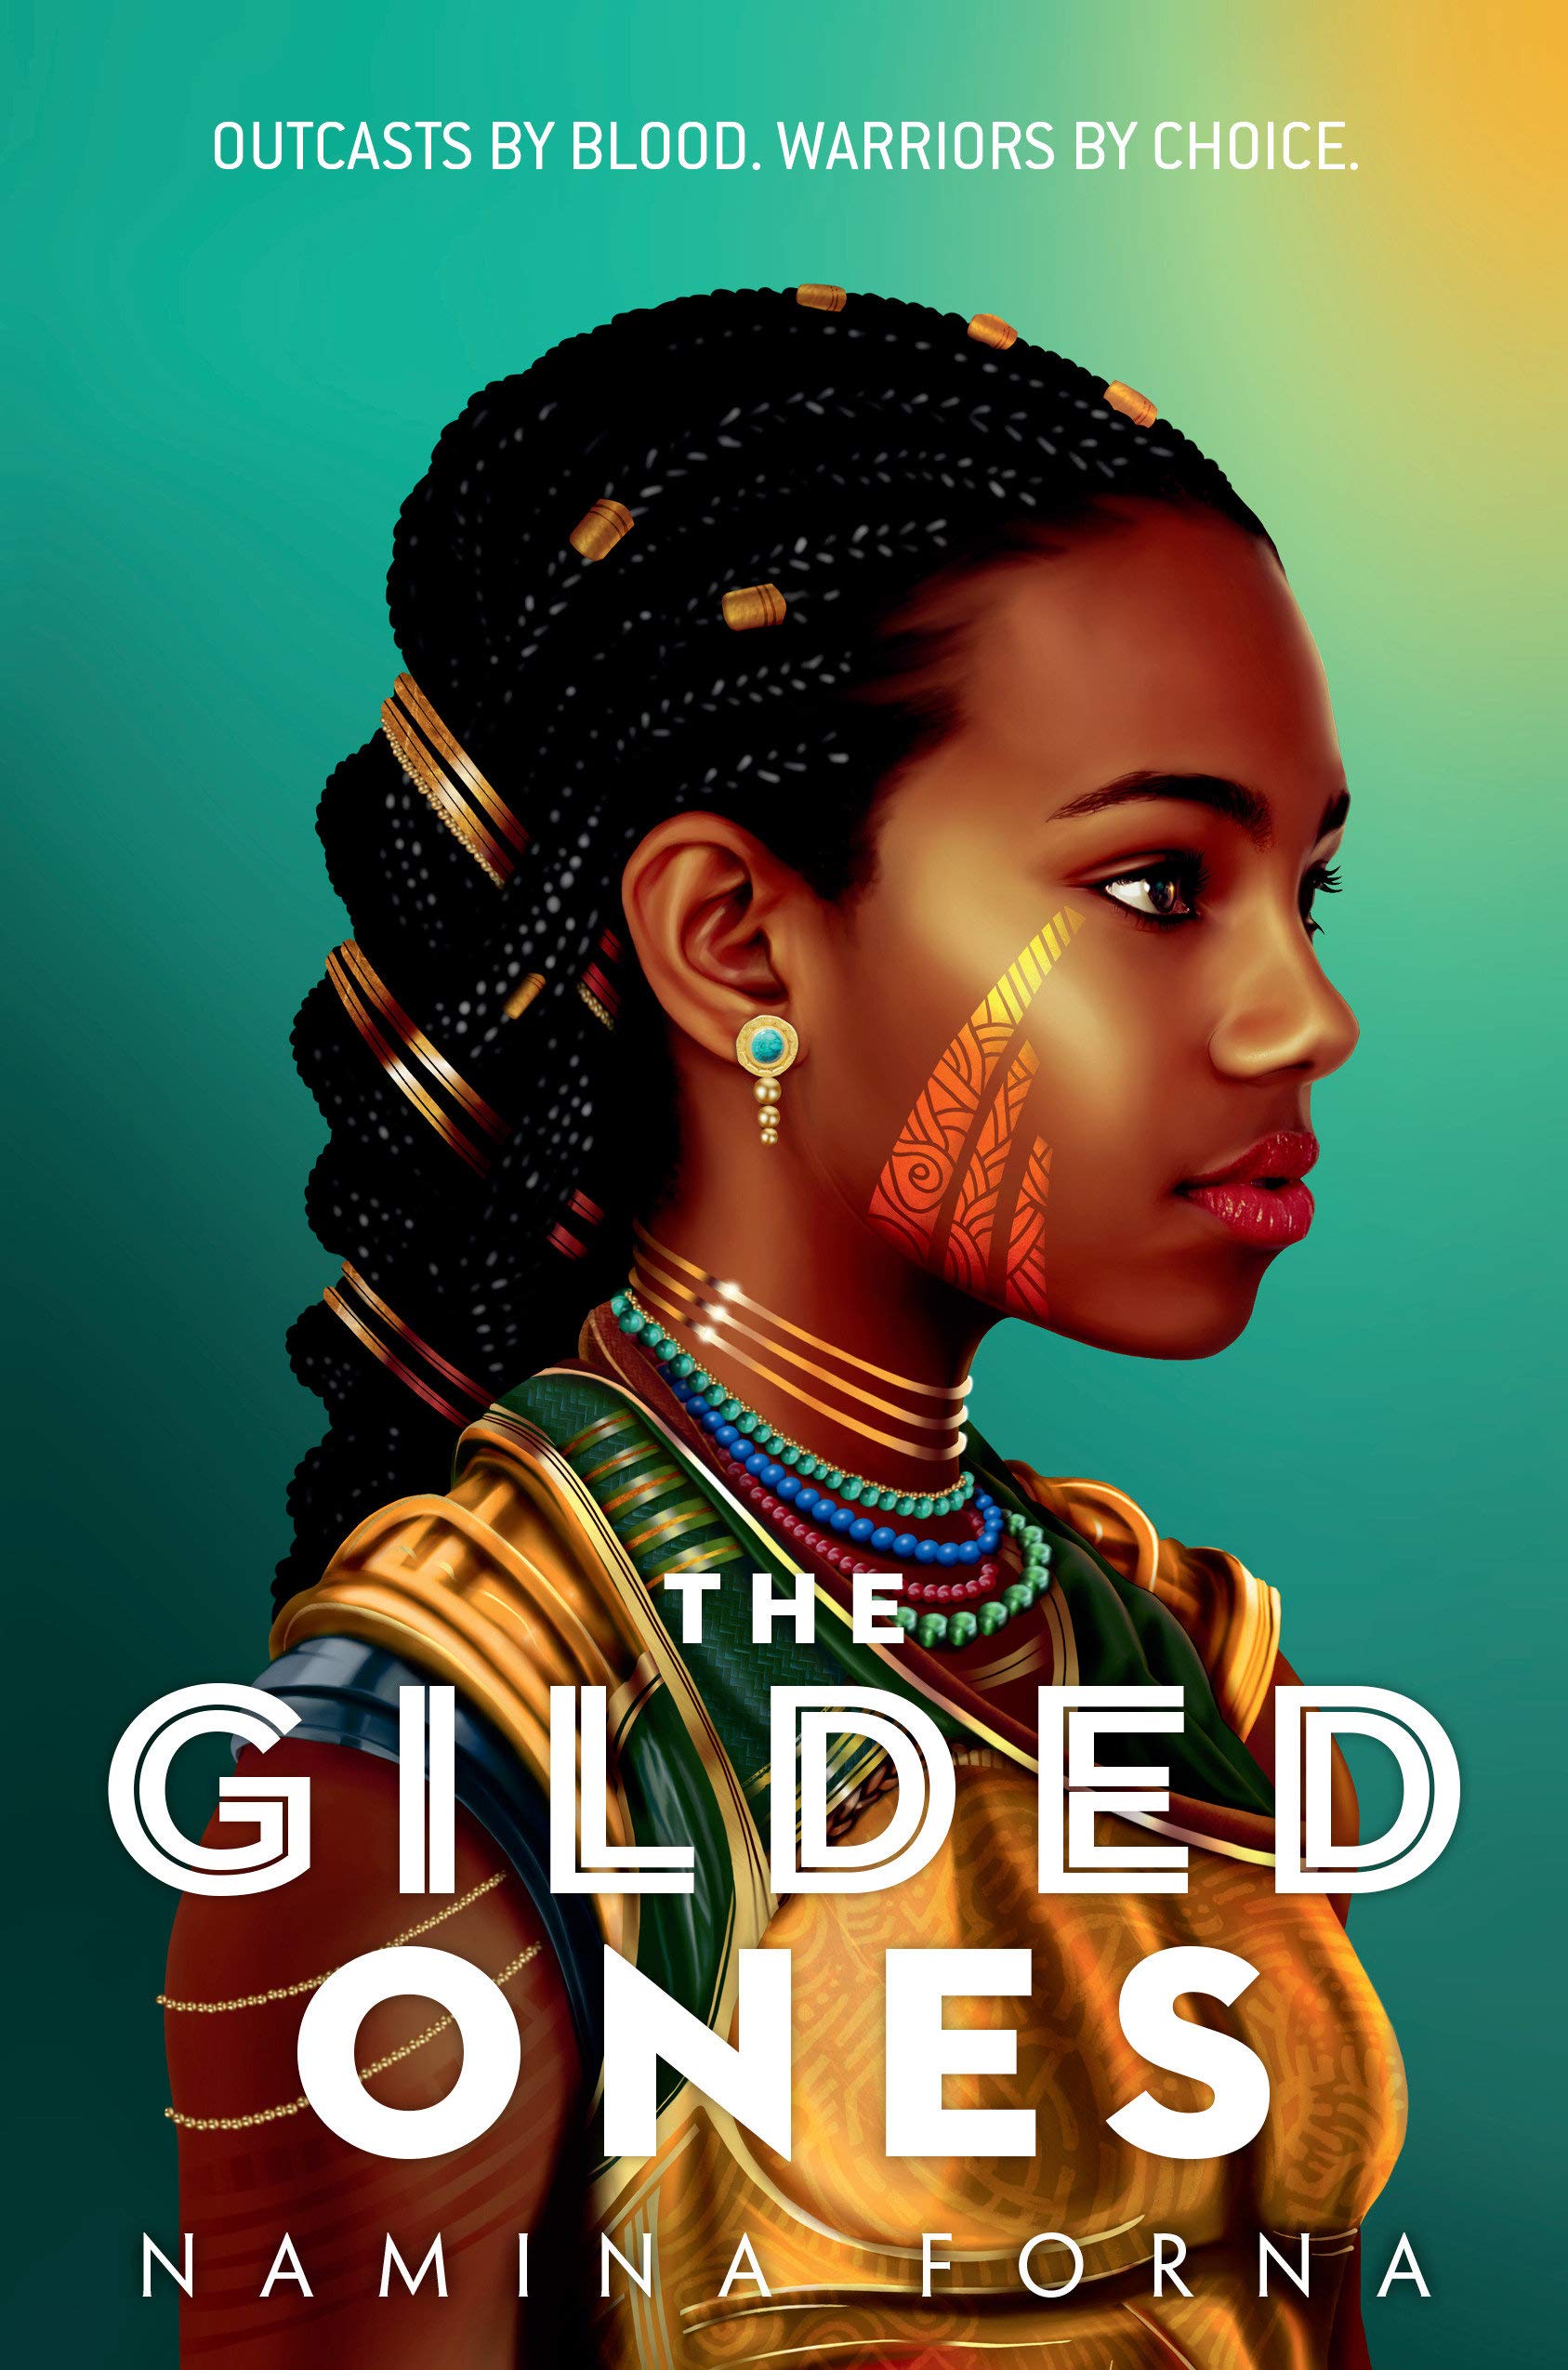 Gilded-Ones-Cover-Source-amazon.com_